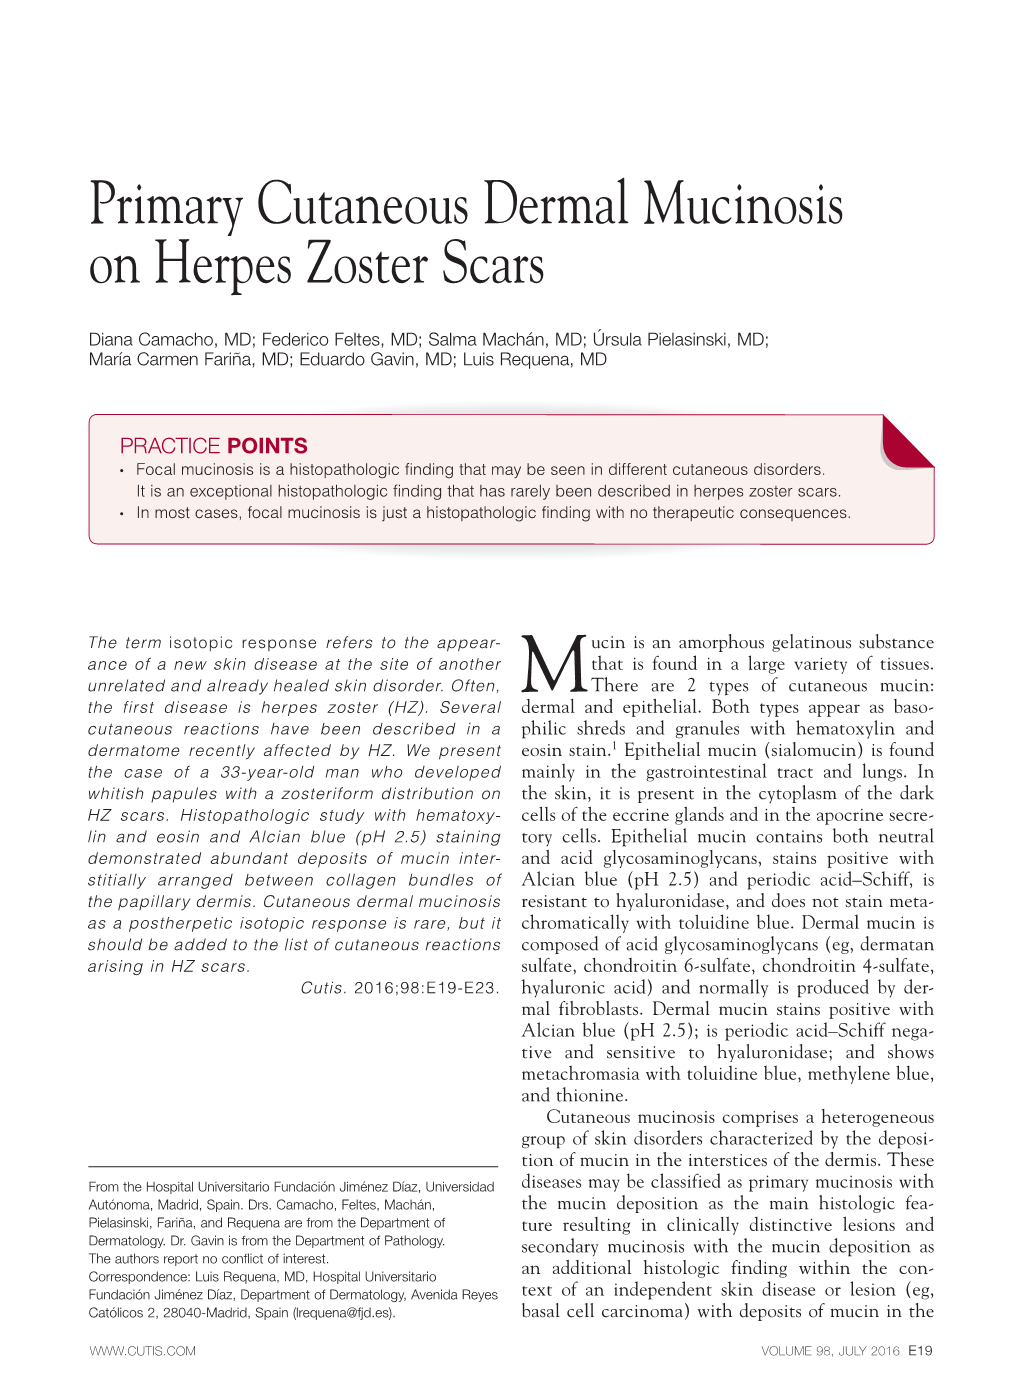 Primary Cutaneous Dermal Mucinosis on Herpes Zoster Scars